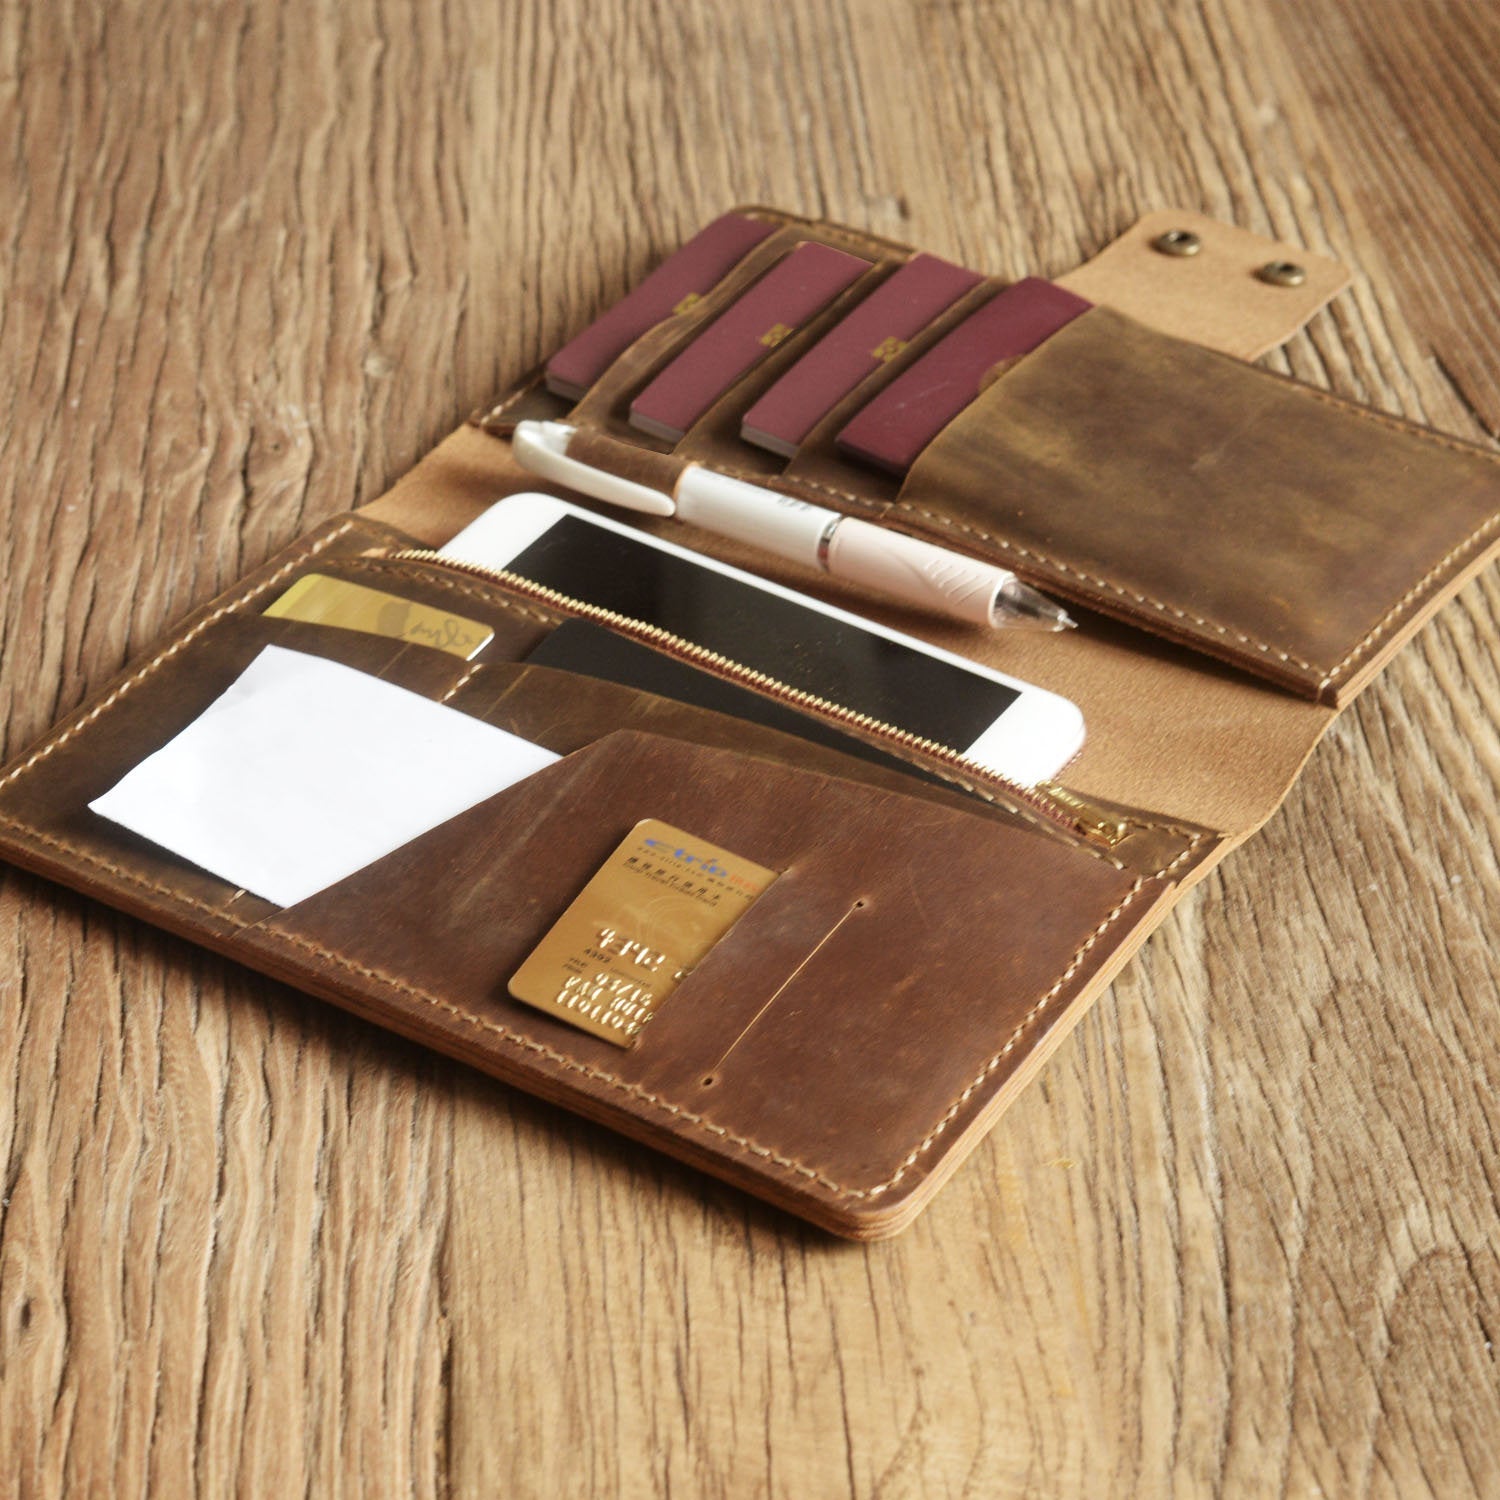 Ethically Crafted Sustainable Leather / Addis Leather Passport Holder / Rust Brown / Genuine Full Grain Leather / Parker Clay / Certified B Corp